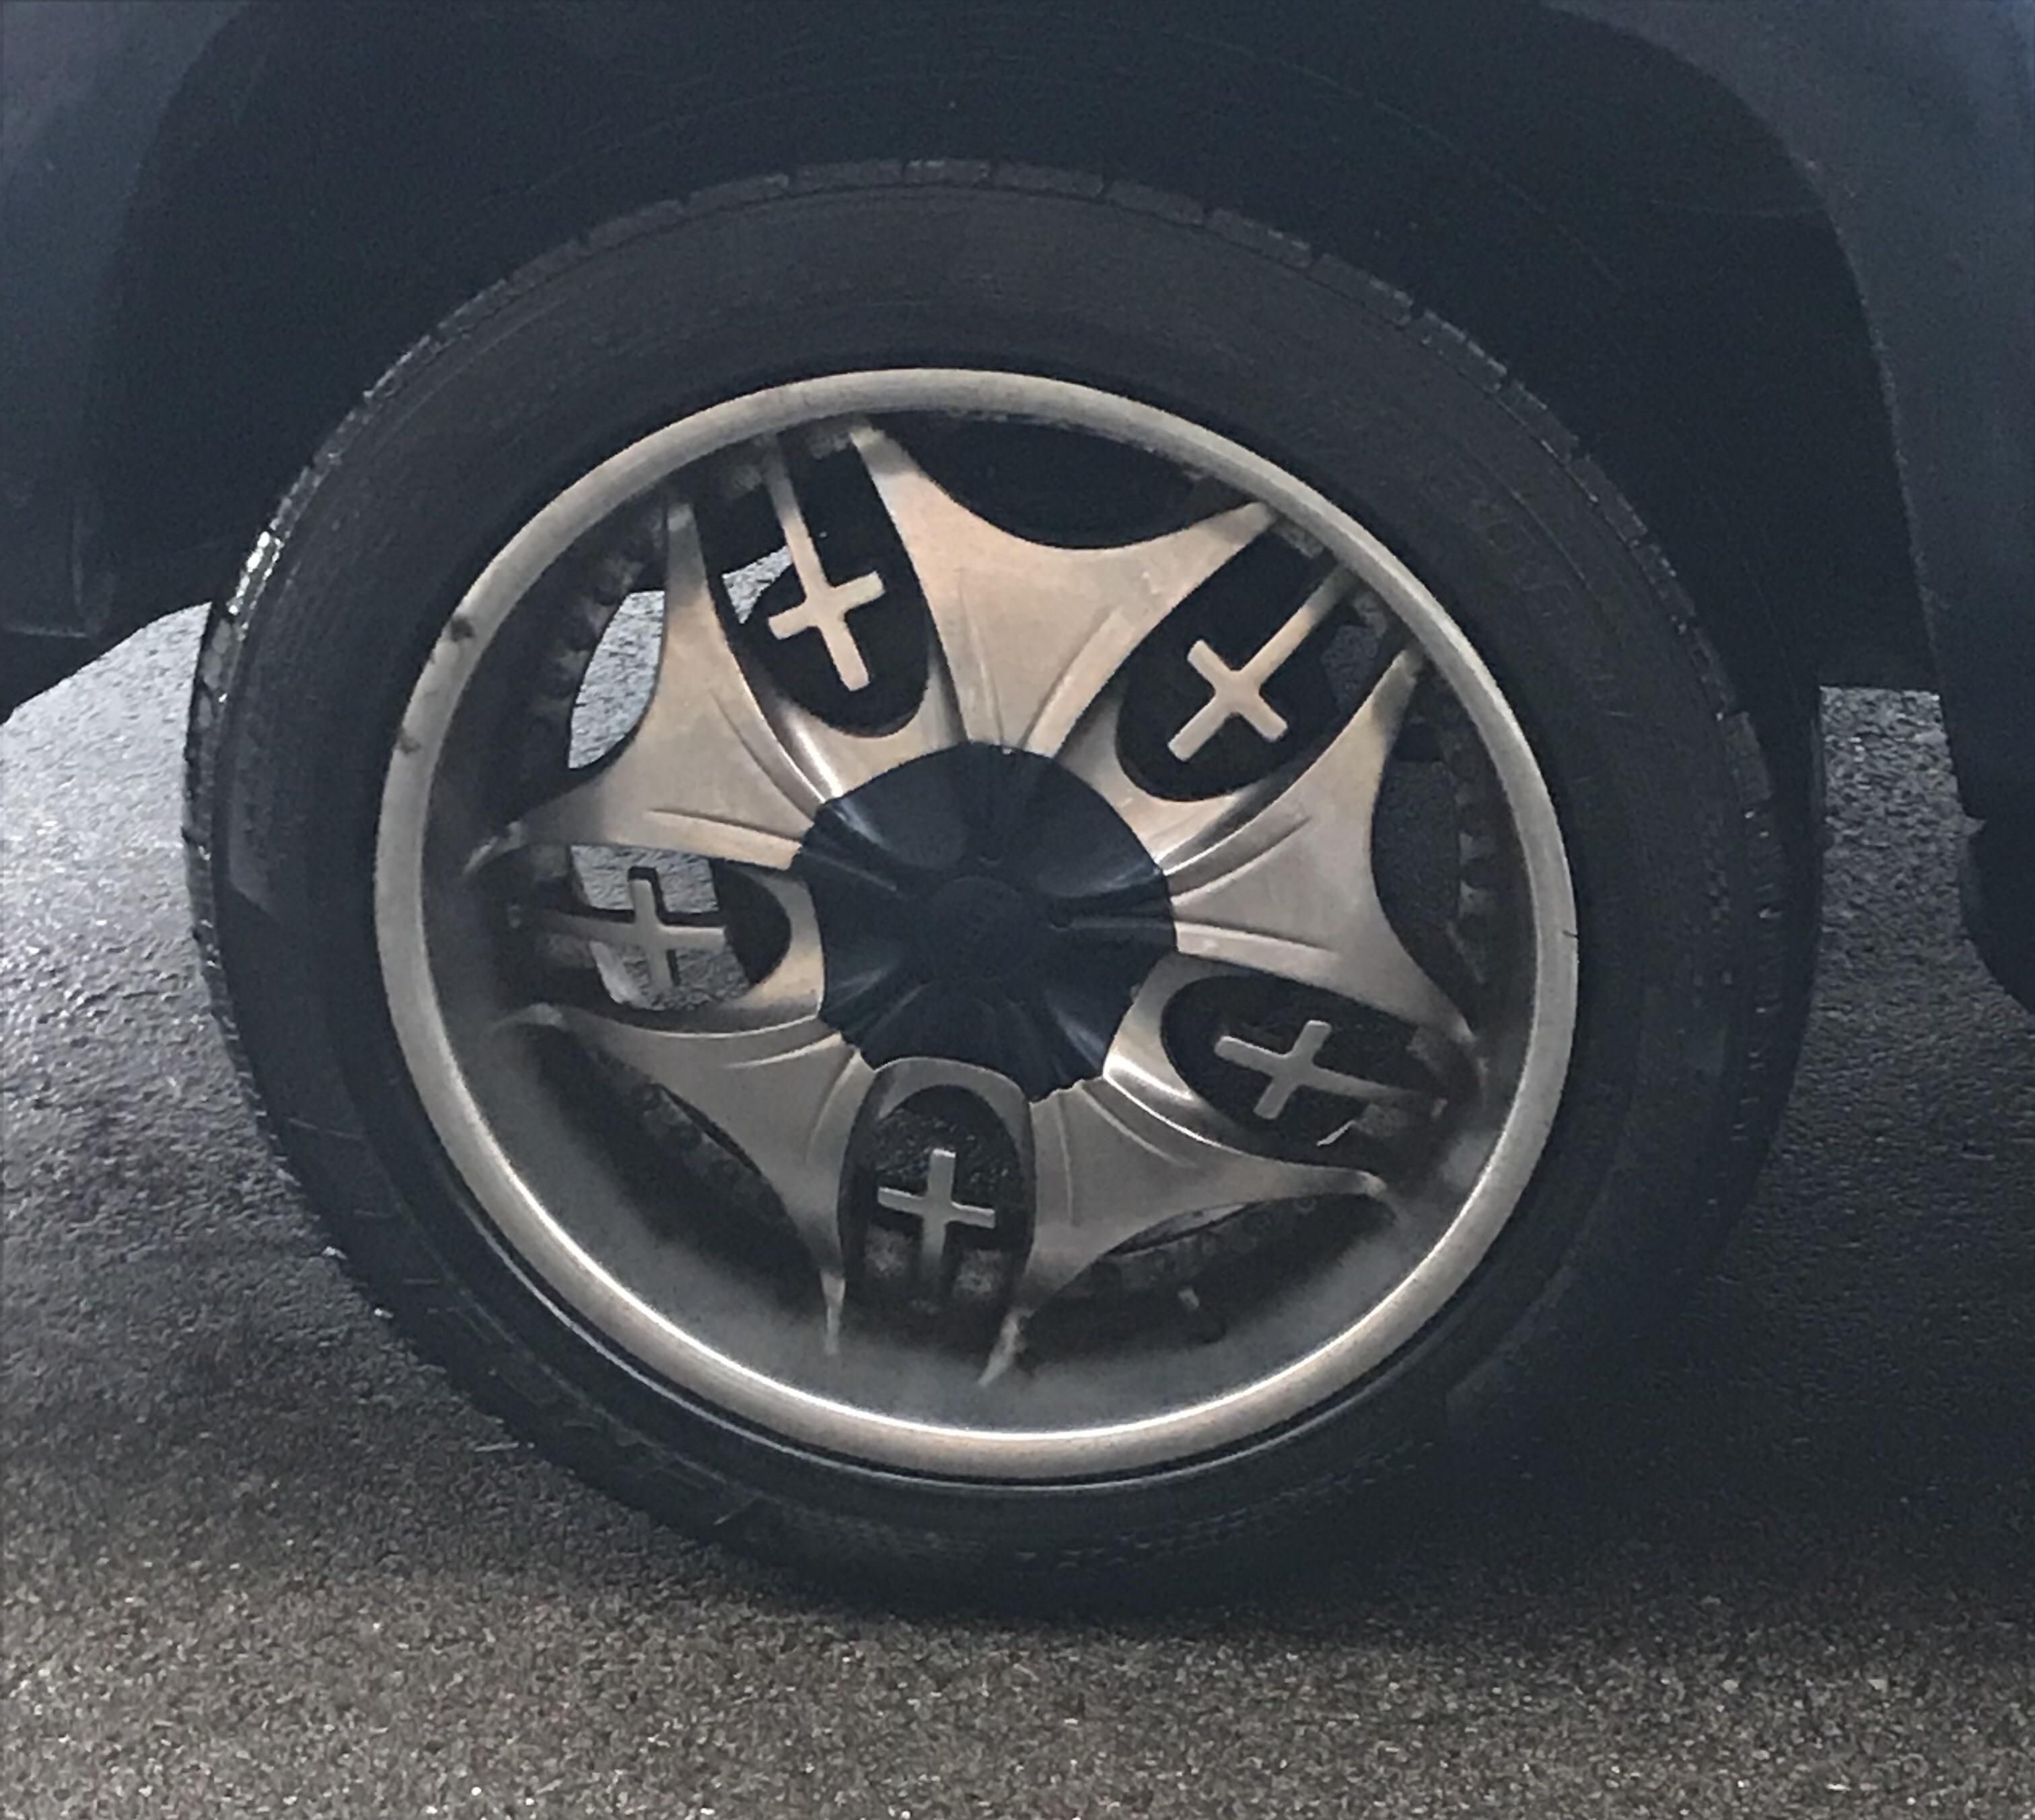 Jesus died for your rims.